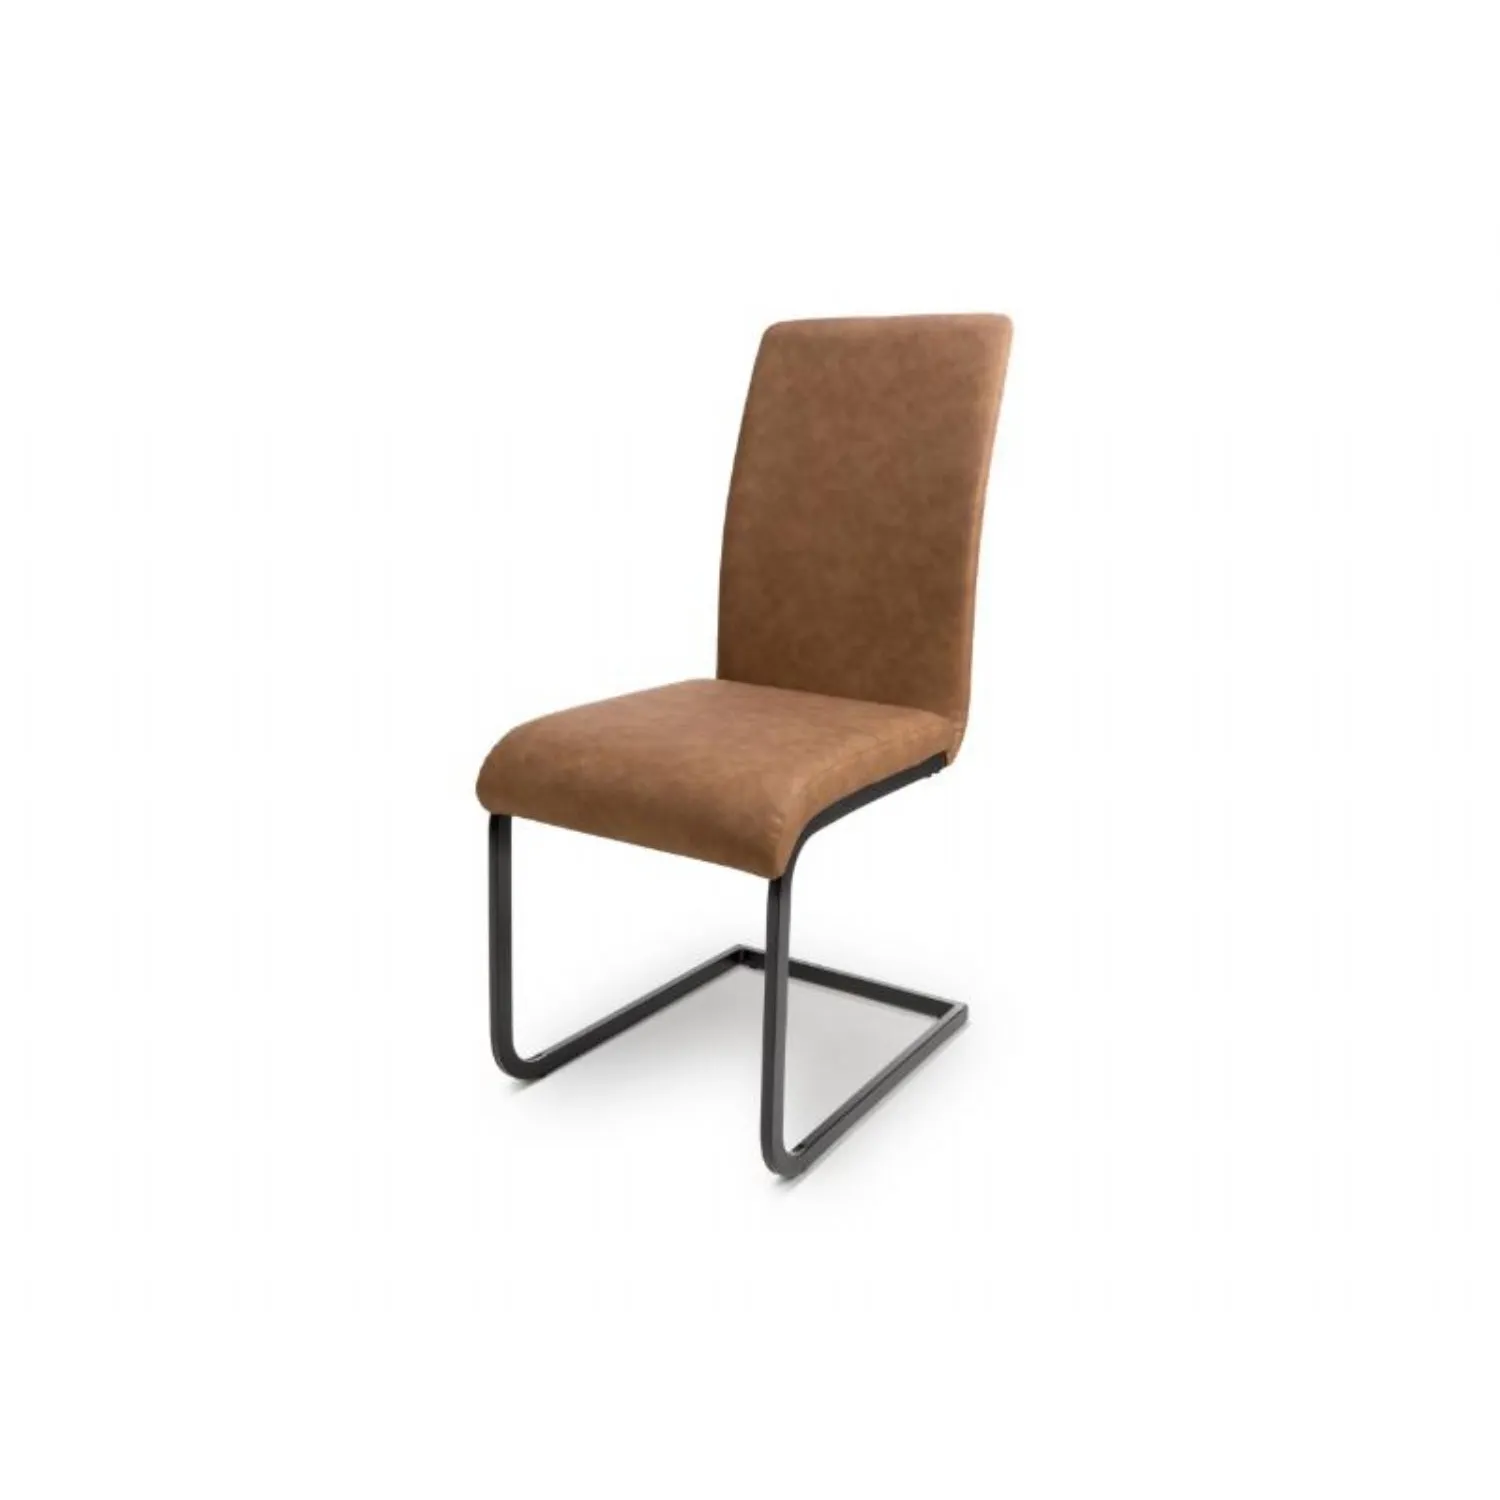 Tan Brown Leather Cantilever Dining Chair Black Metal Legs